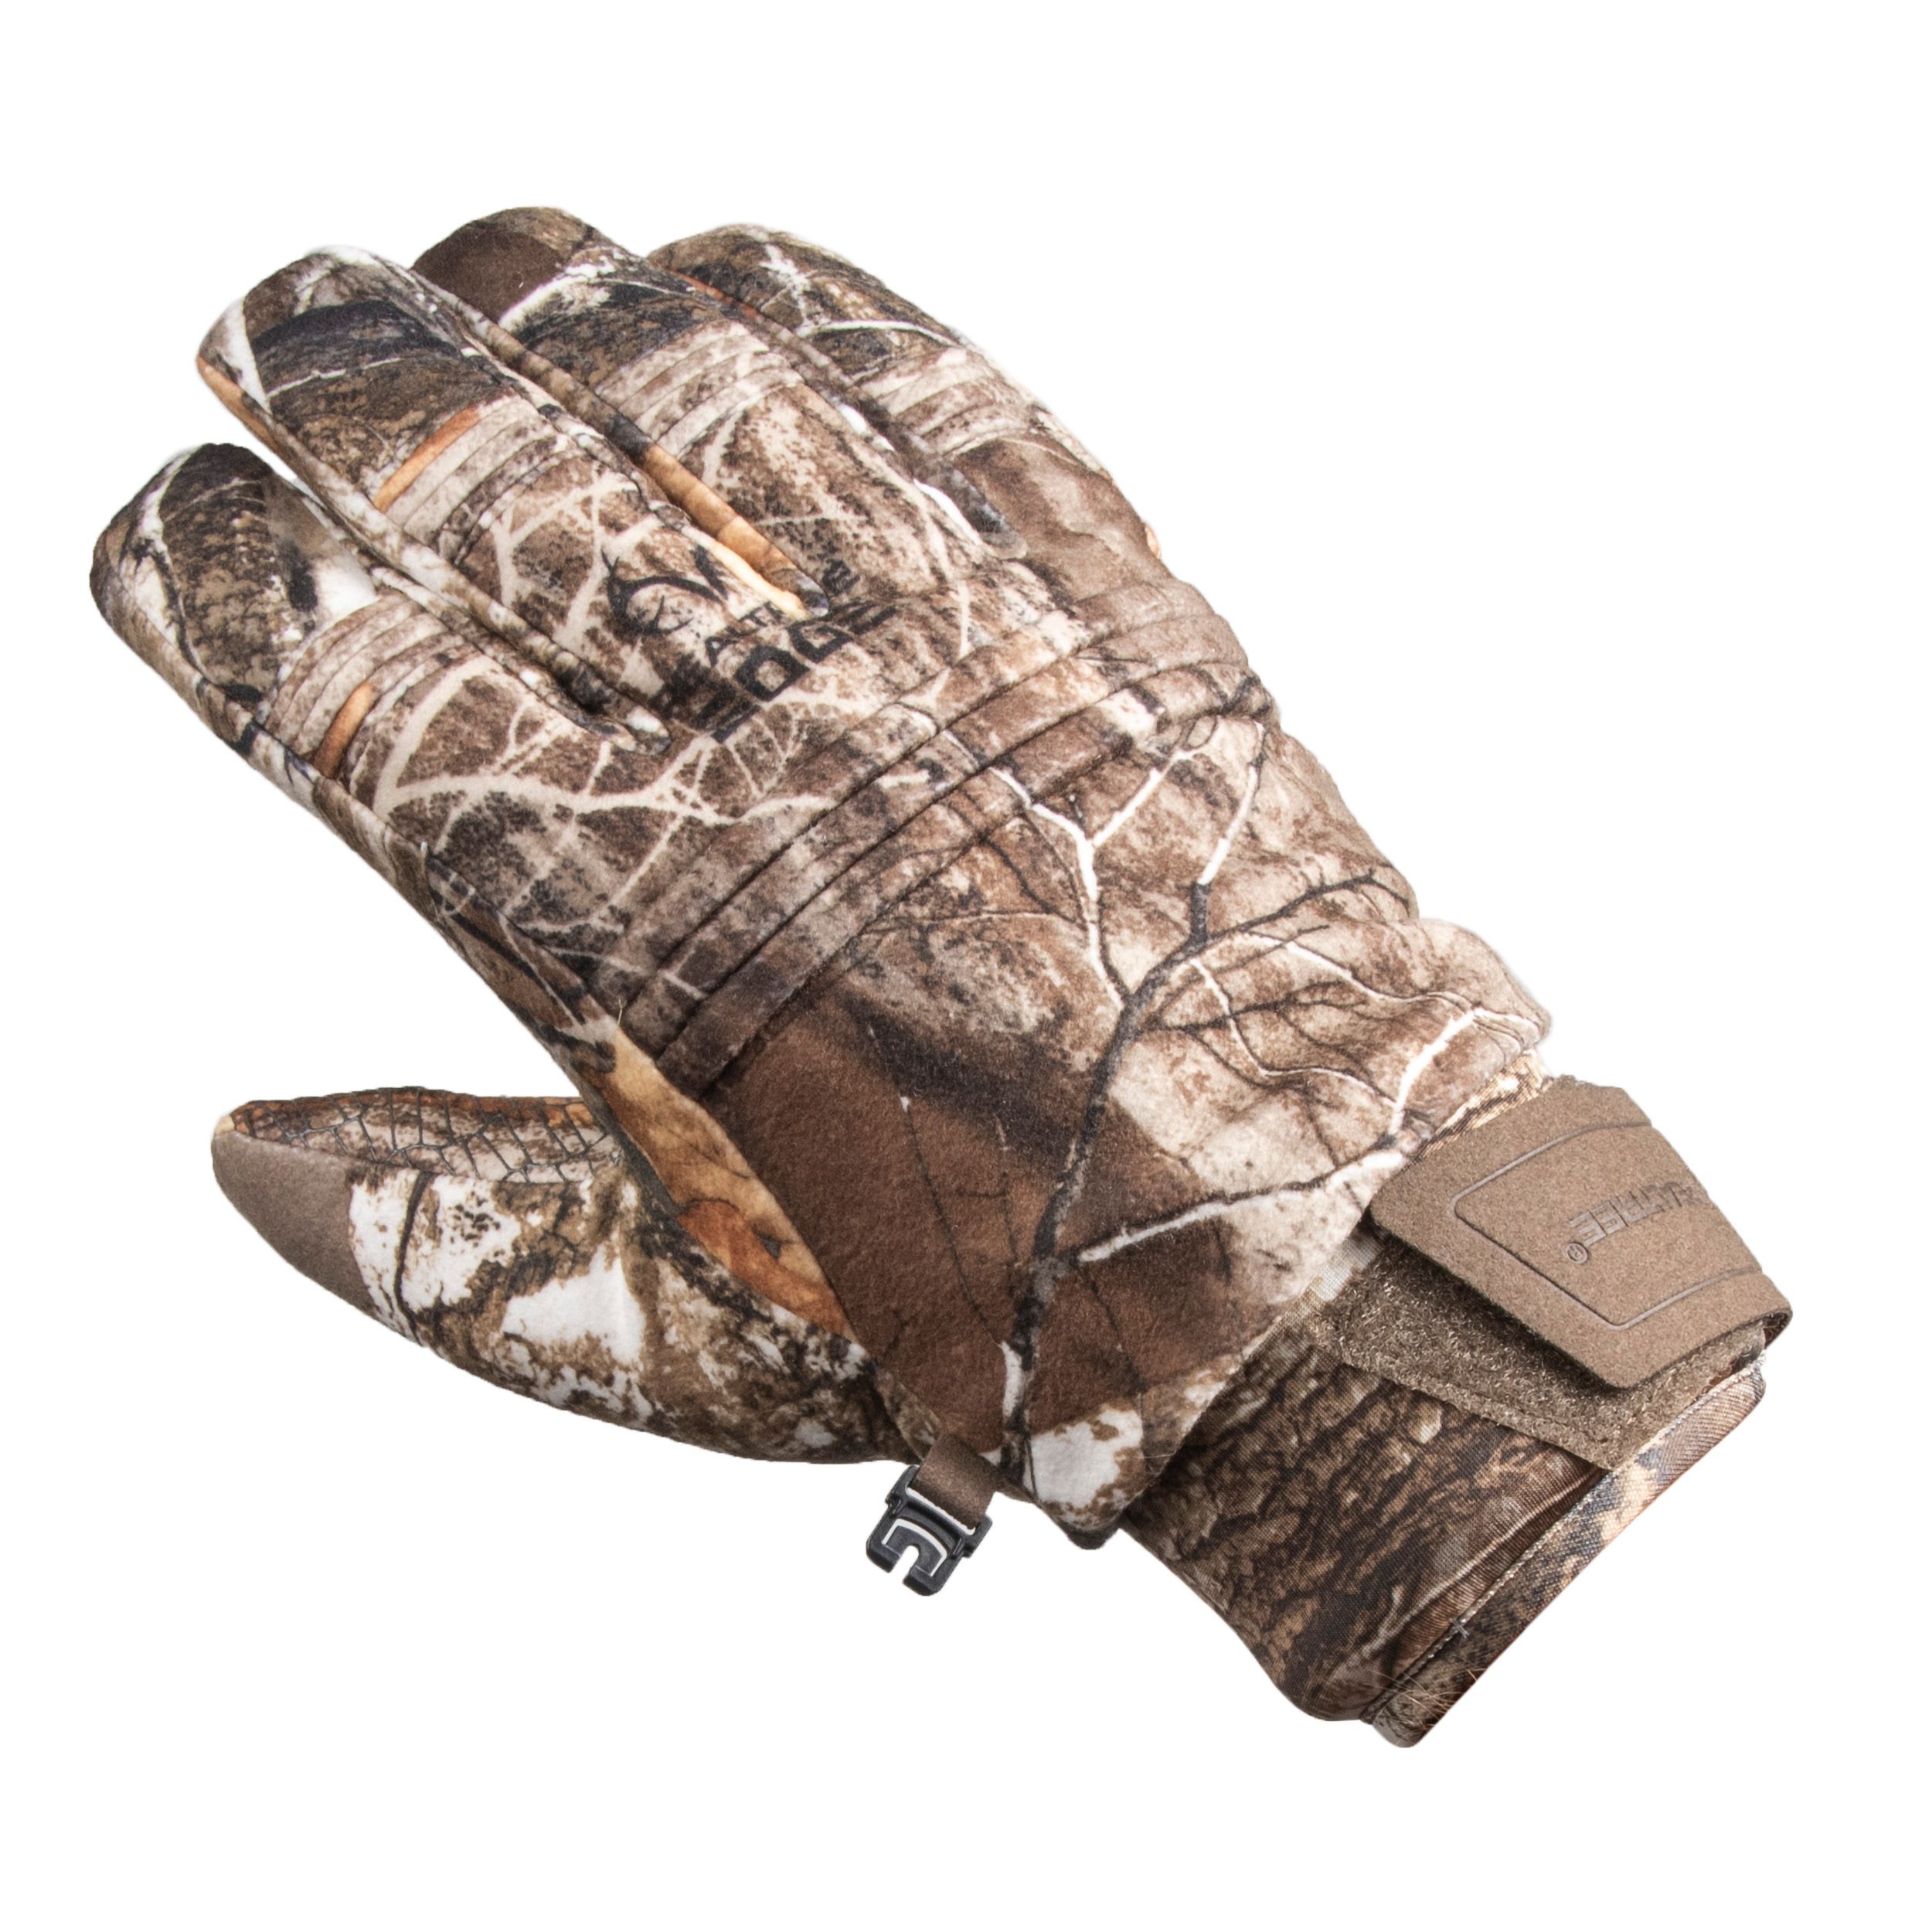 Realtree Edge Men's Heavyweight Gloves, Sizes M-L/XL - image 2 of 5